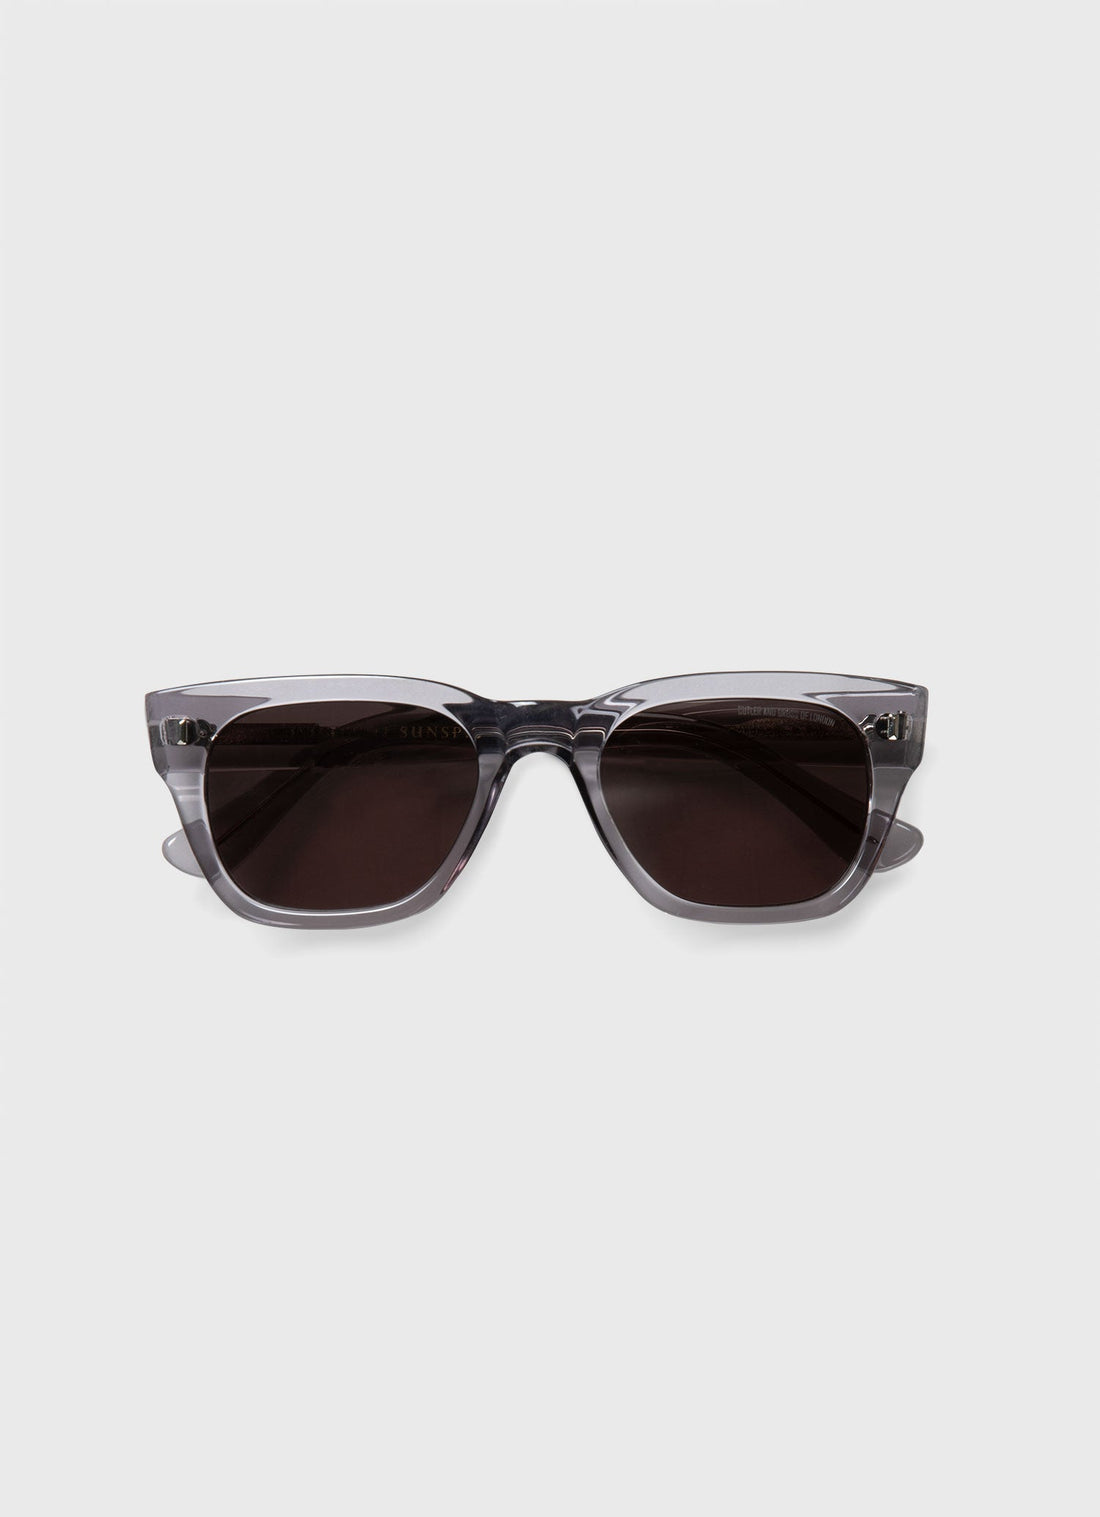 Cutler and Gross Sunglasses in Pewter